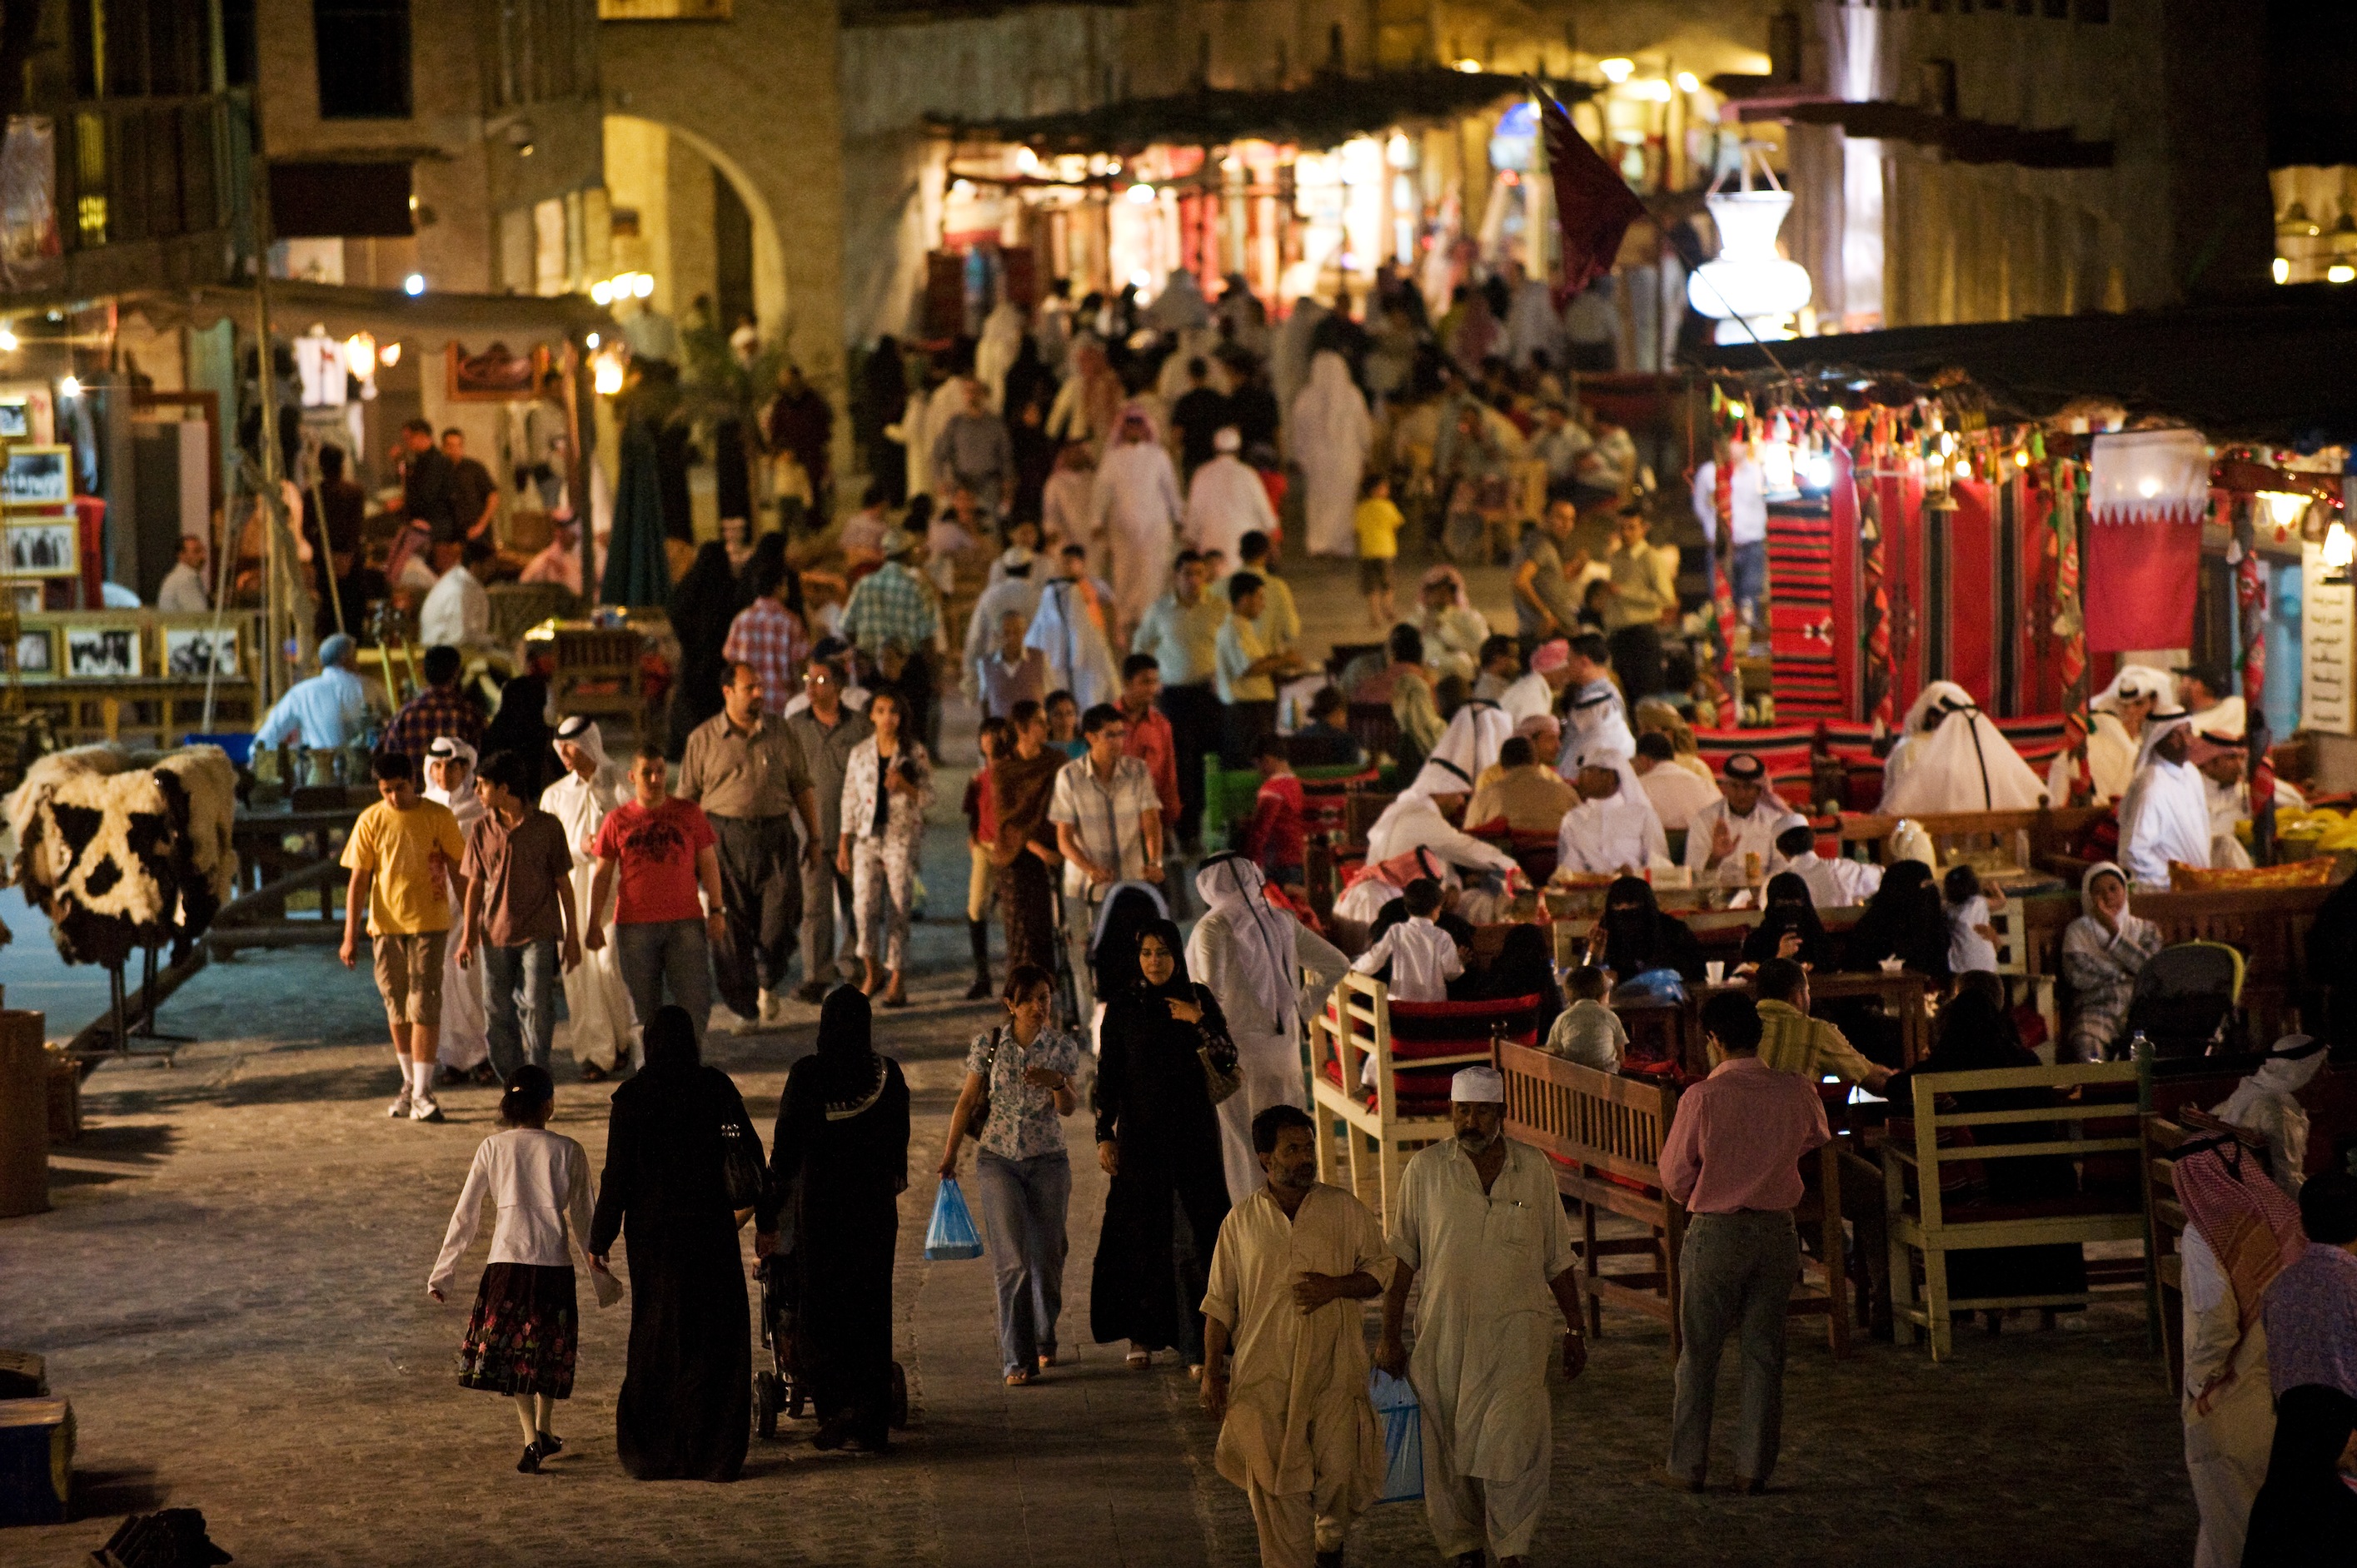 A busy evening a Souq Waqif. Image by Terry McCormick / Photolibrary / Getty Images